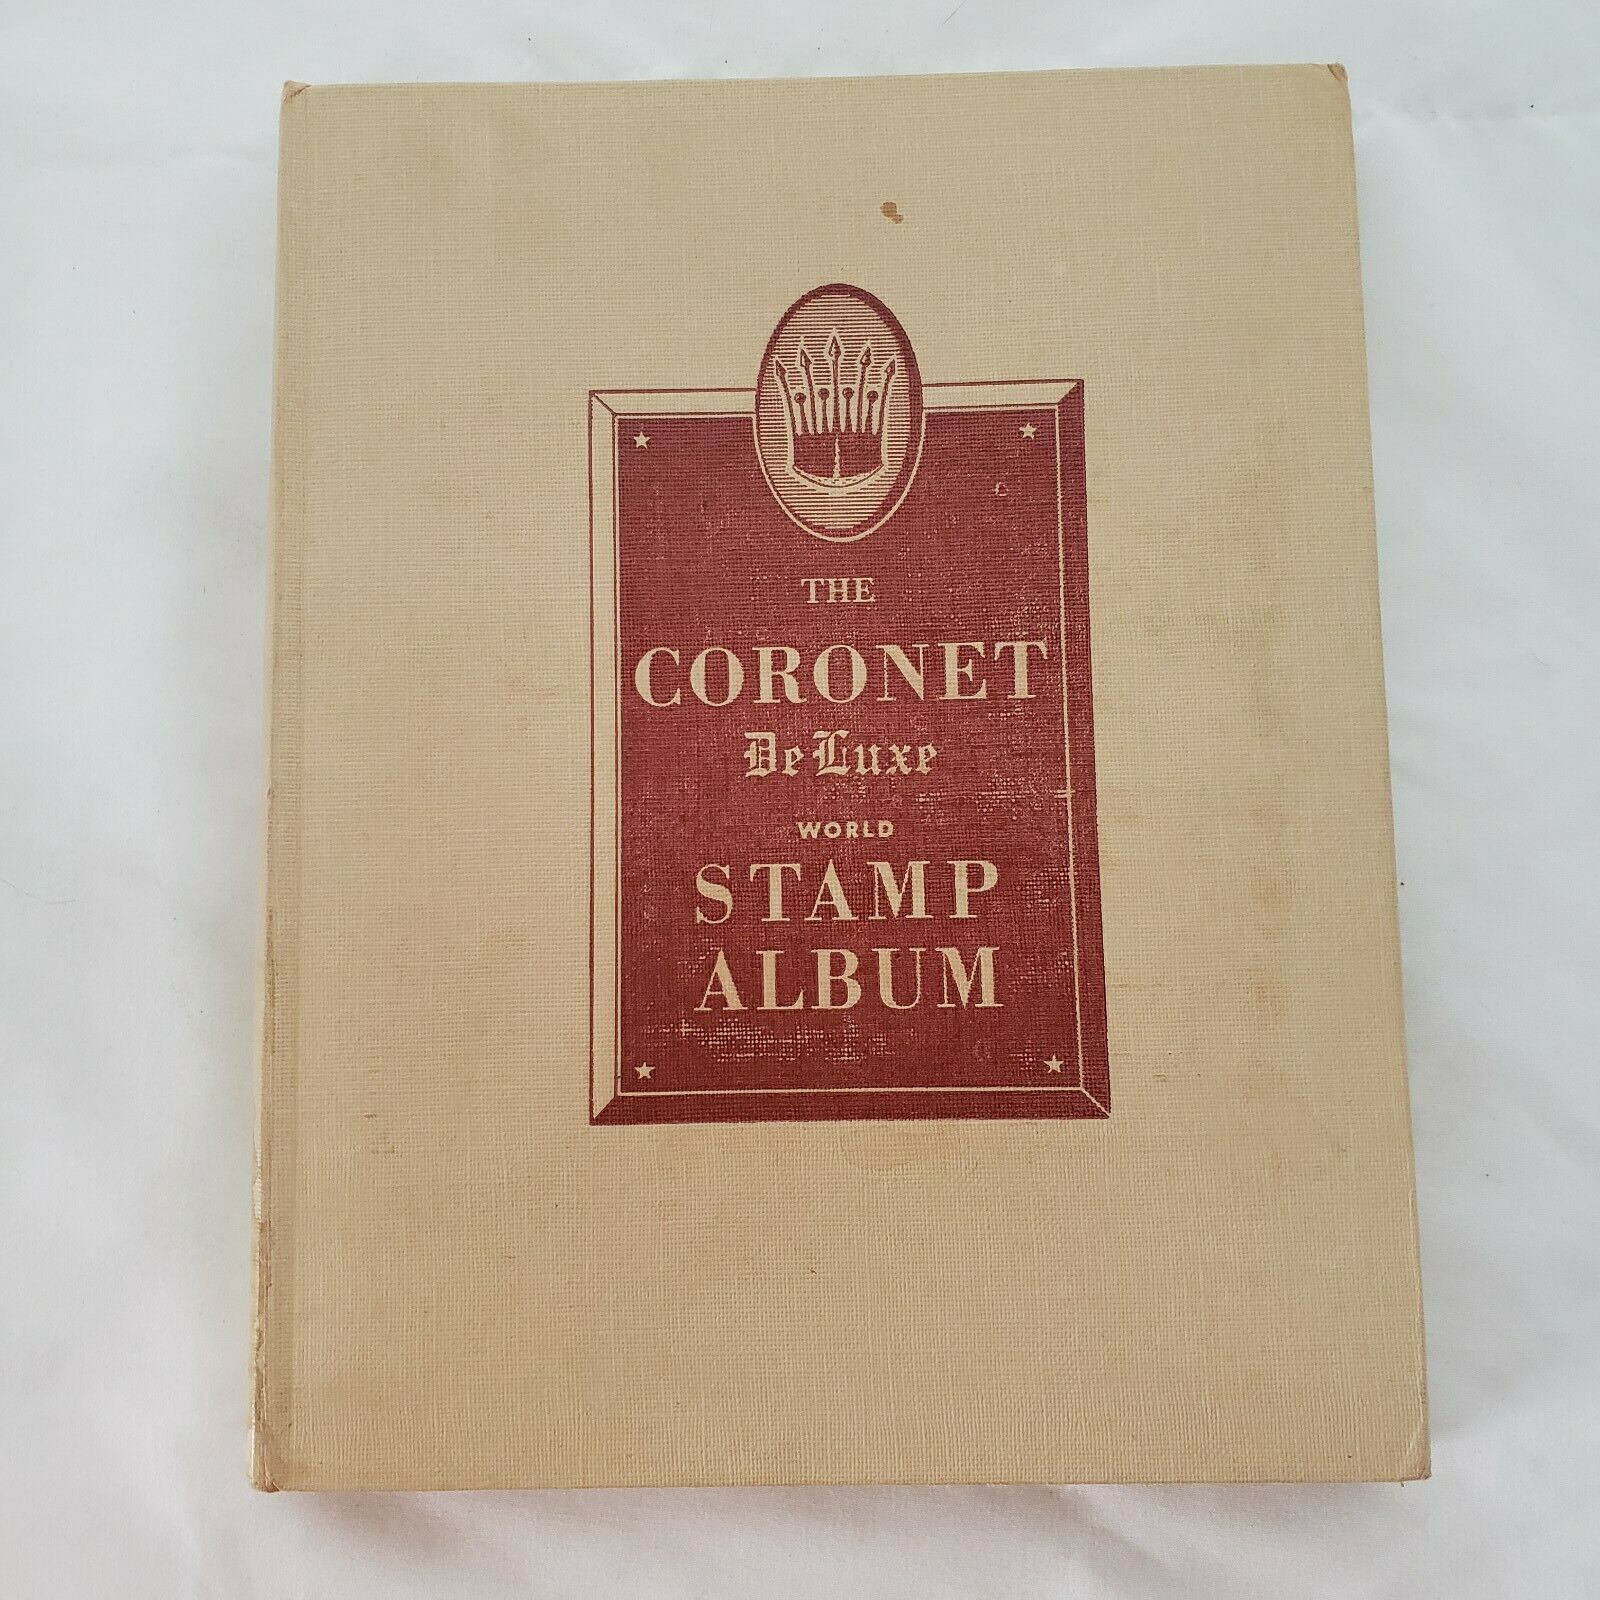 The Coronet Deluxe World Stamp Album 1957 Grossman Stamp Co Usa Unused & Clean